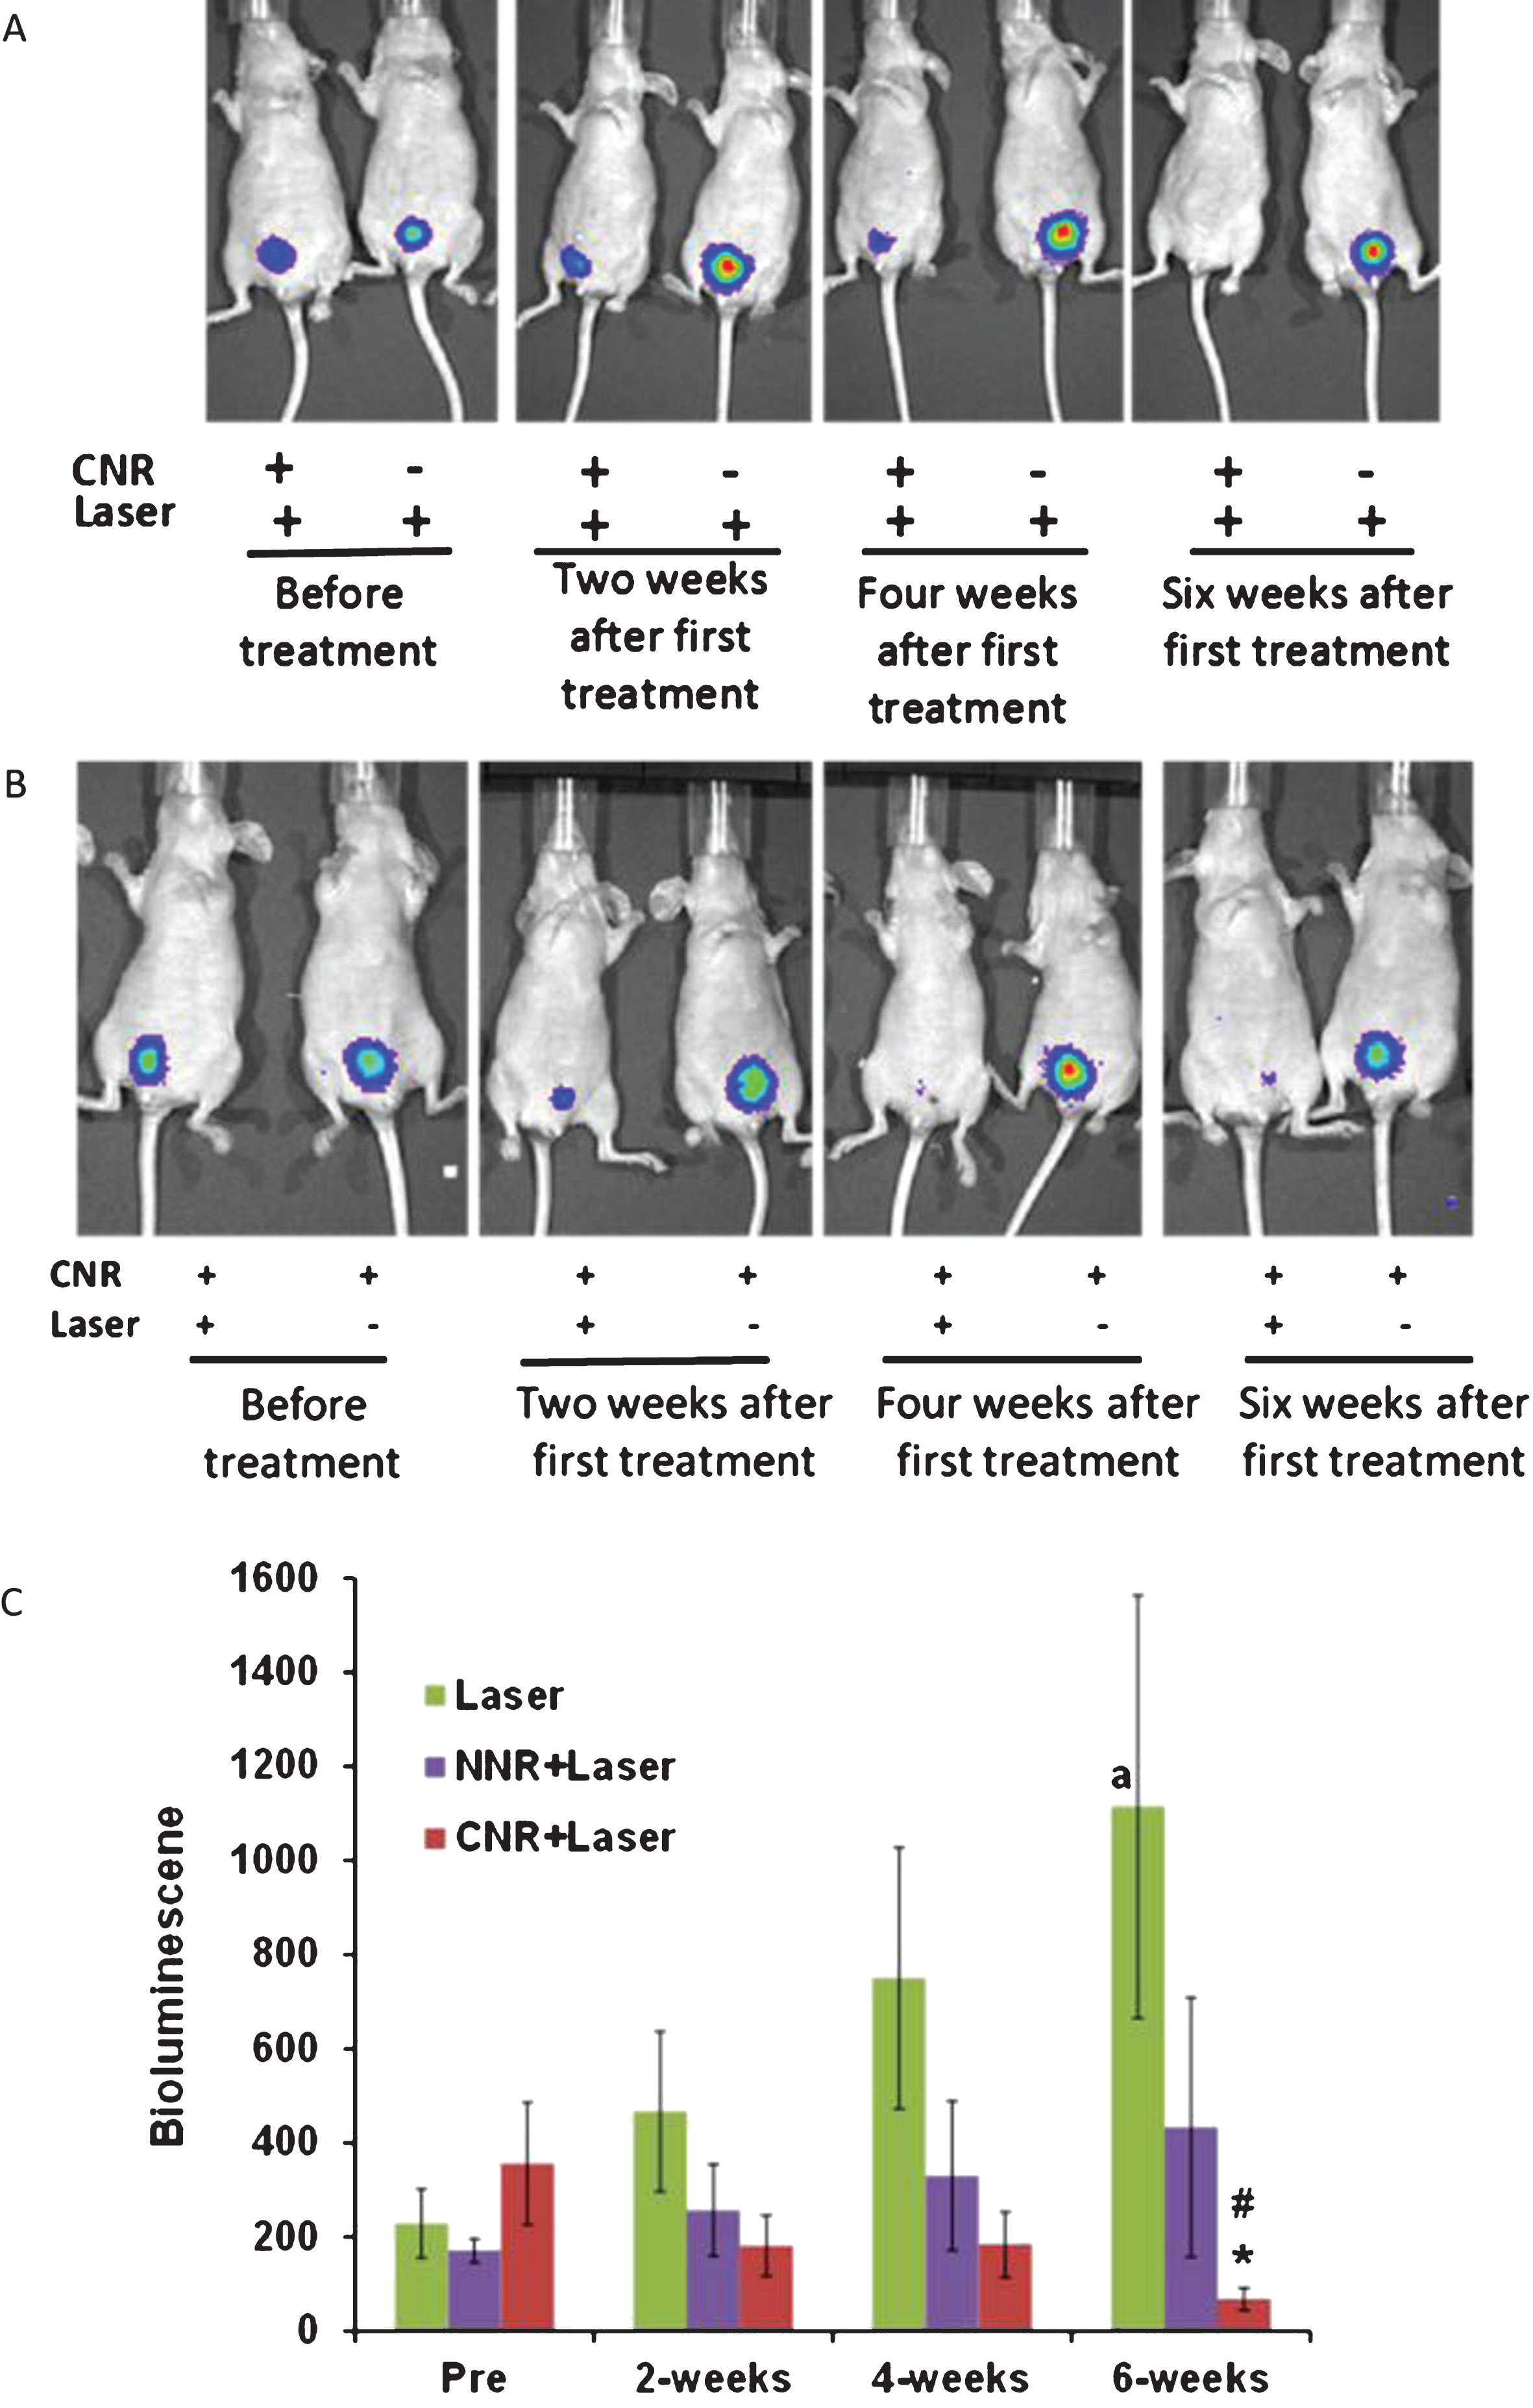 In vivo Photothermal effects of nanorods. Representative mice with positive luciferase images were intravesically treated with CNR in conjunction with external delivery of NIR light once per week for four weeks, using the optimized safe dose of laser treatment (power density of 2.1 W/cm2 for 30 seconds). The presence of viable tumor cells was tracked by bioluminescent imaging weekly for at least six weeks. Representative images show significant anti-tumor effect of CNR followed by NIR laser as compared with the negative controls with and without CNR followed by laser treatment (Fig. 4A) and CNR treatment with and without laser (Fig. 4B). Figure 4C shows the effects of treatments on tumor growth by luminescence units. *p = 0.035 effect of CNR+Laser treatment compared to laser treatment alone at 6 weeks. #p≤0.04 and ap = 0.046 compared to pre-treatment. NNR = naked nanorods, CNR = conjugated nanorods.